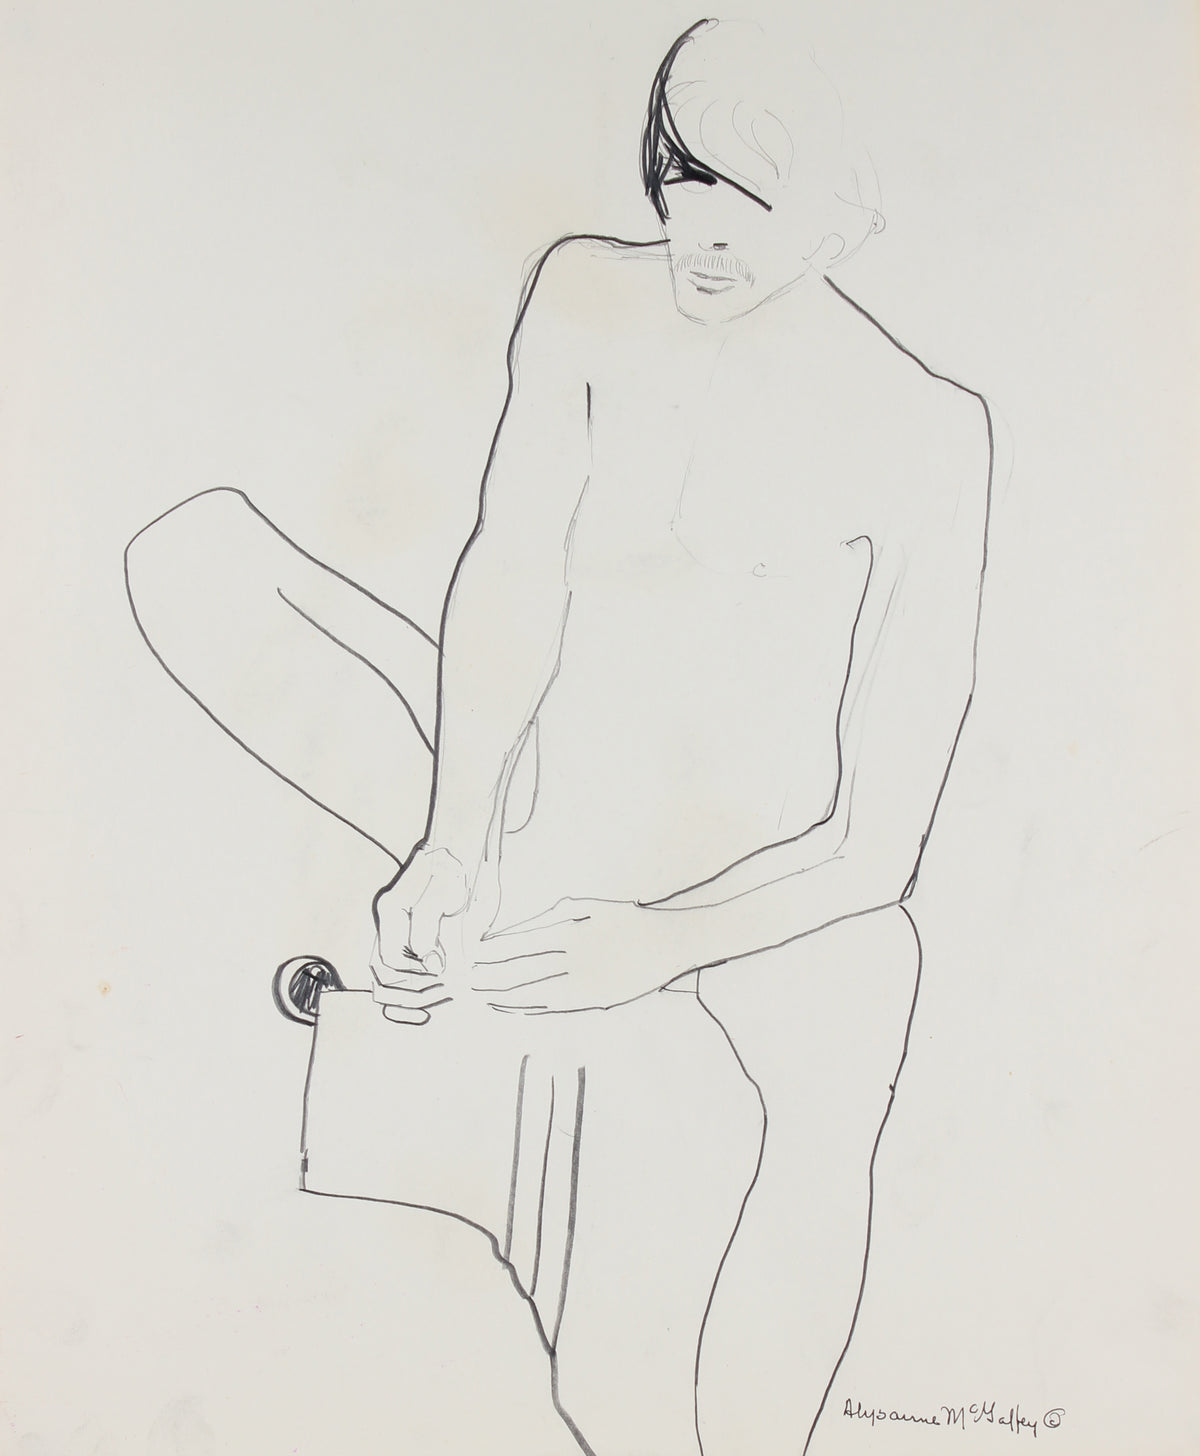 Seated Male Nude &lt;br&gt;1950-60s Charcoal &amp; Graphite &lt;br&gt;&lt;br&gt;#23386